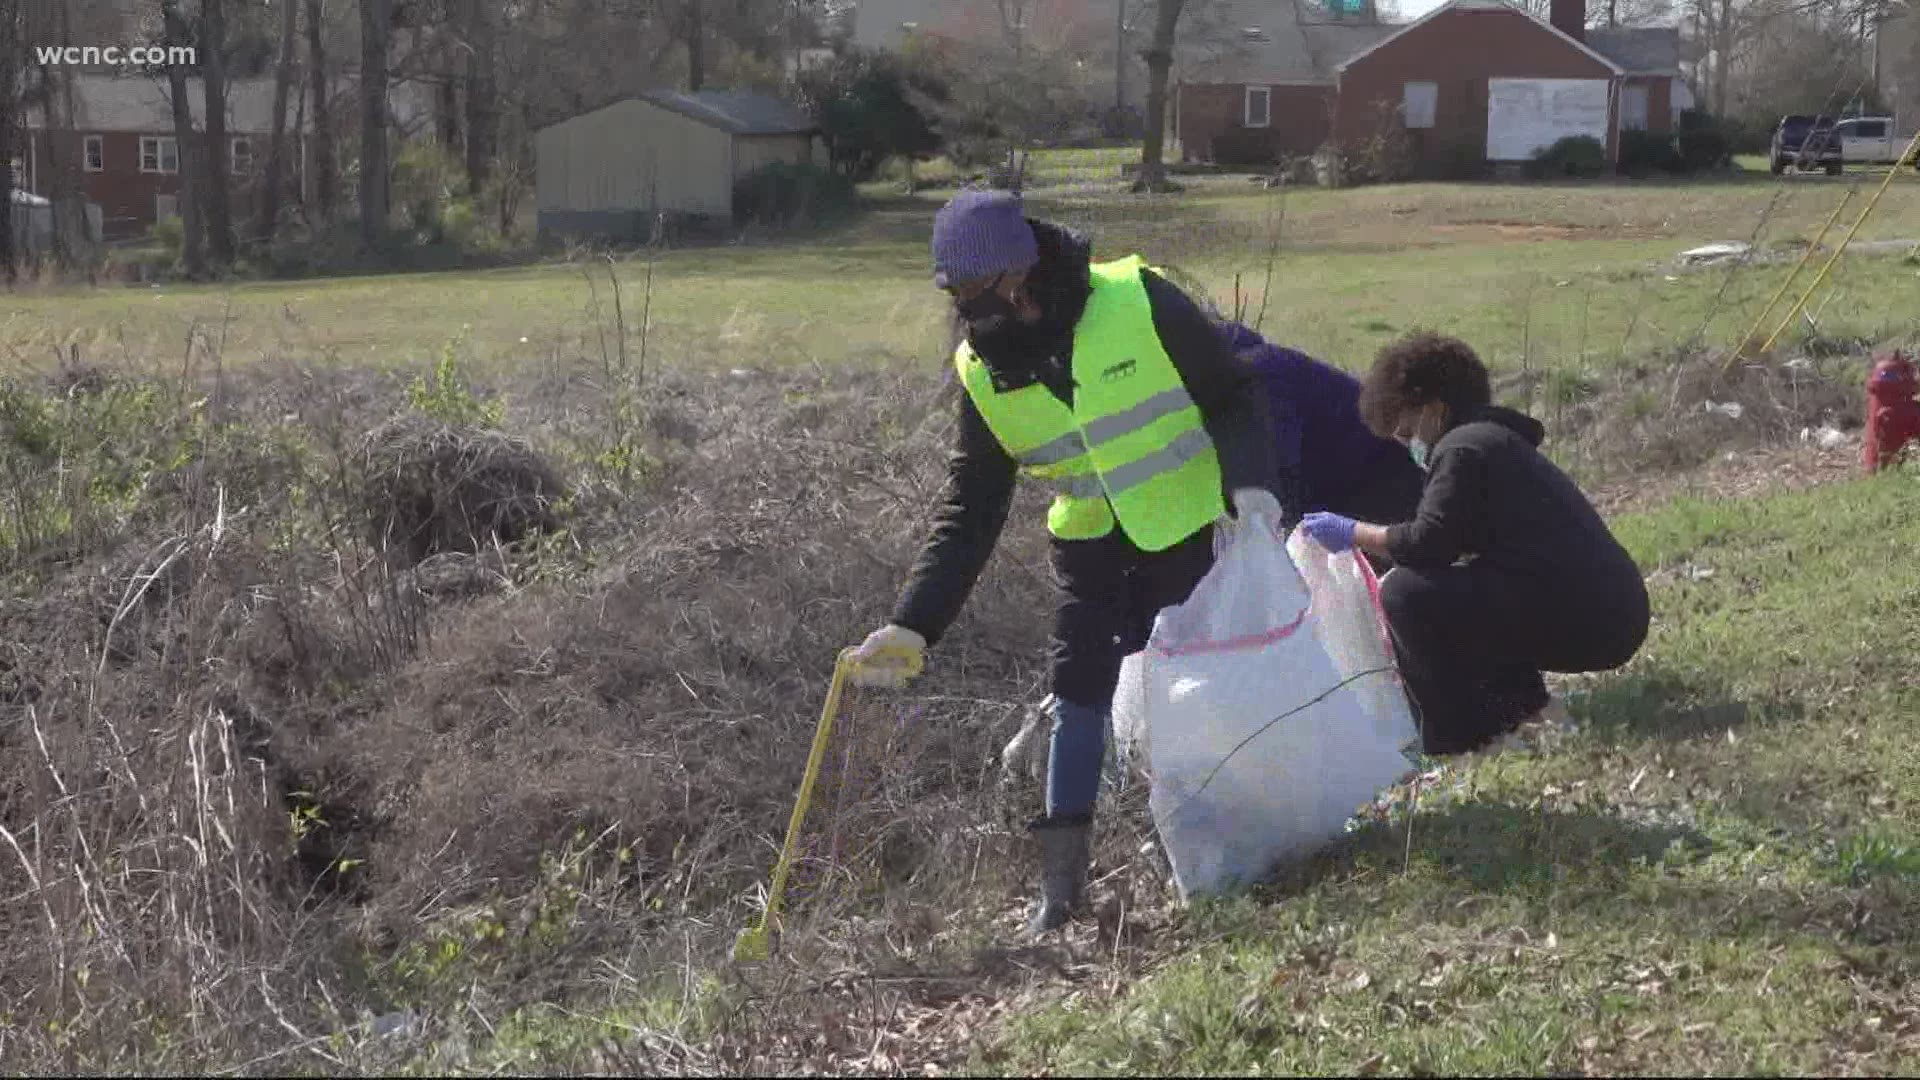 Volunteers joined city employees and members of the Gastonia Police Department to help clean up litter in Gastonia on Saturday morning.